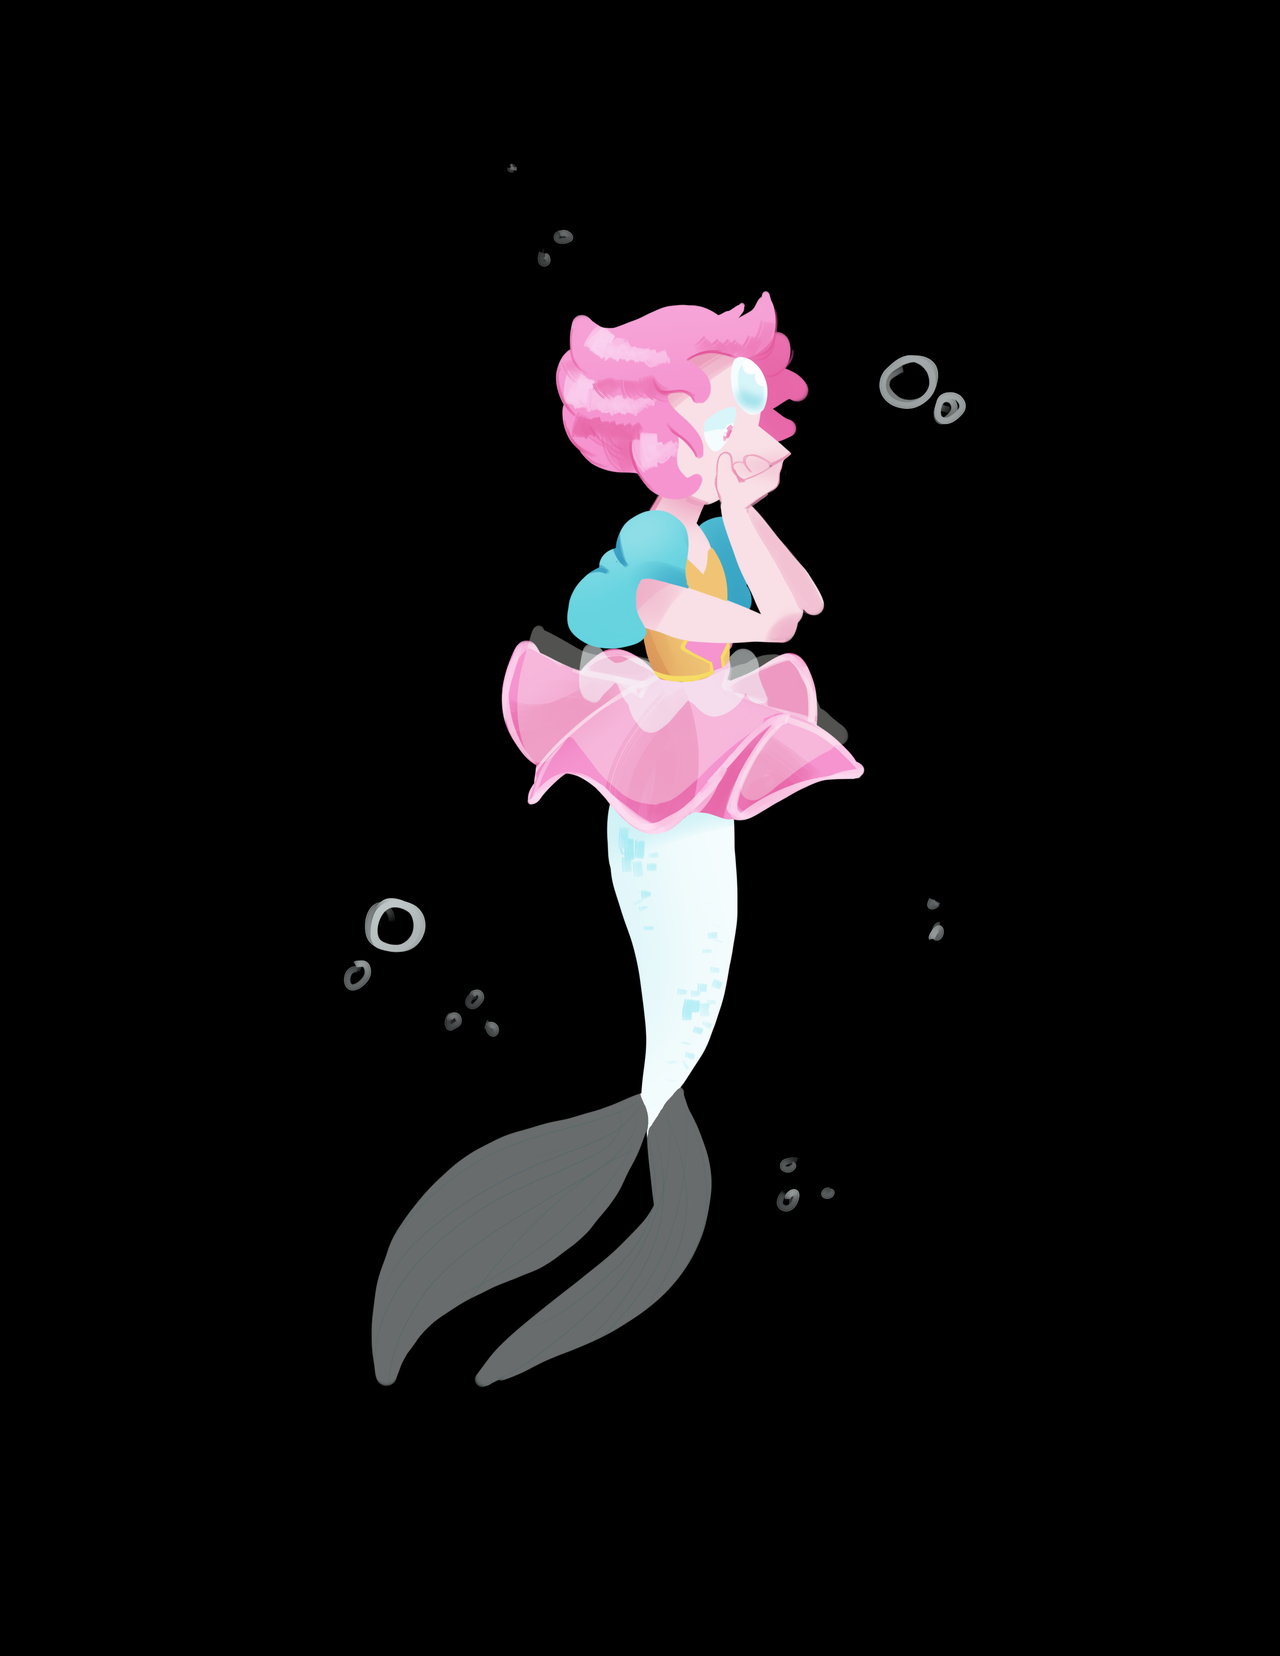 still trying to get some mermays out before the month’s end